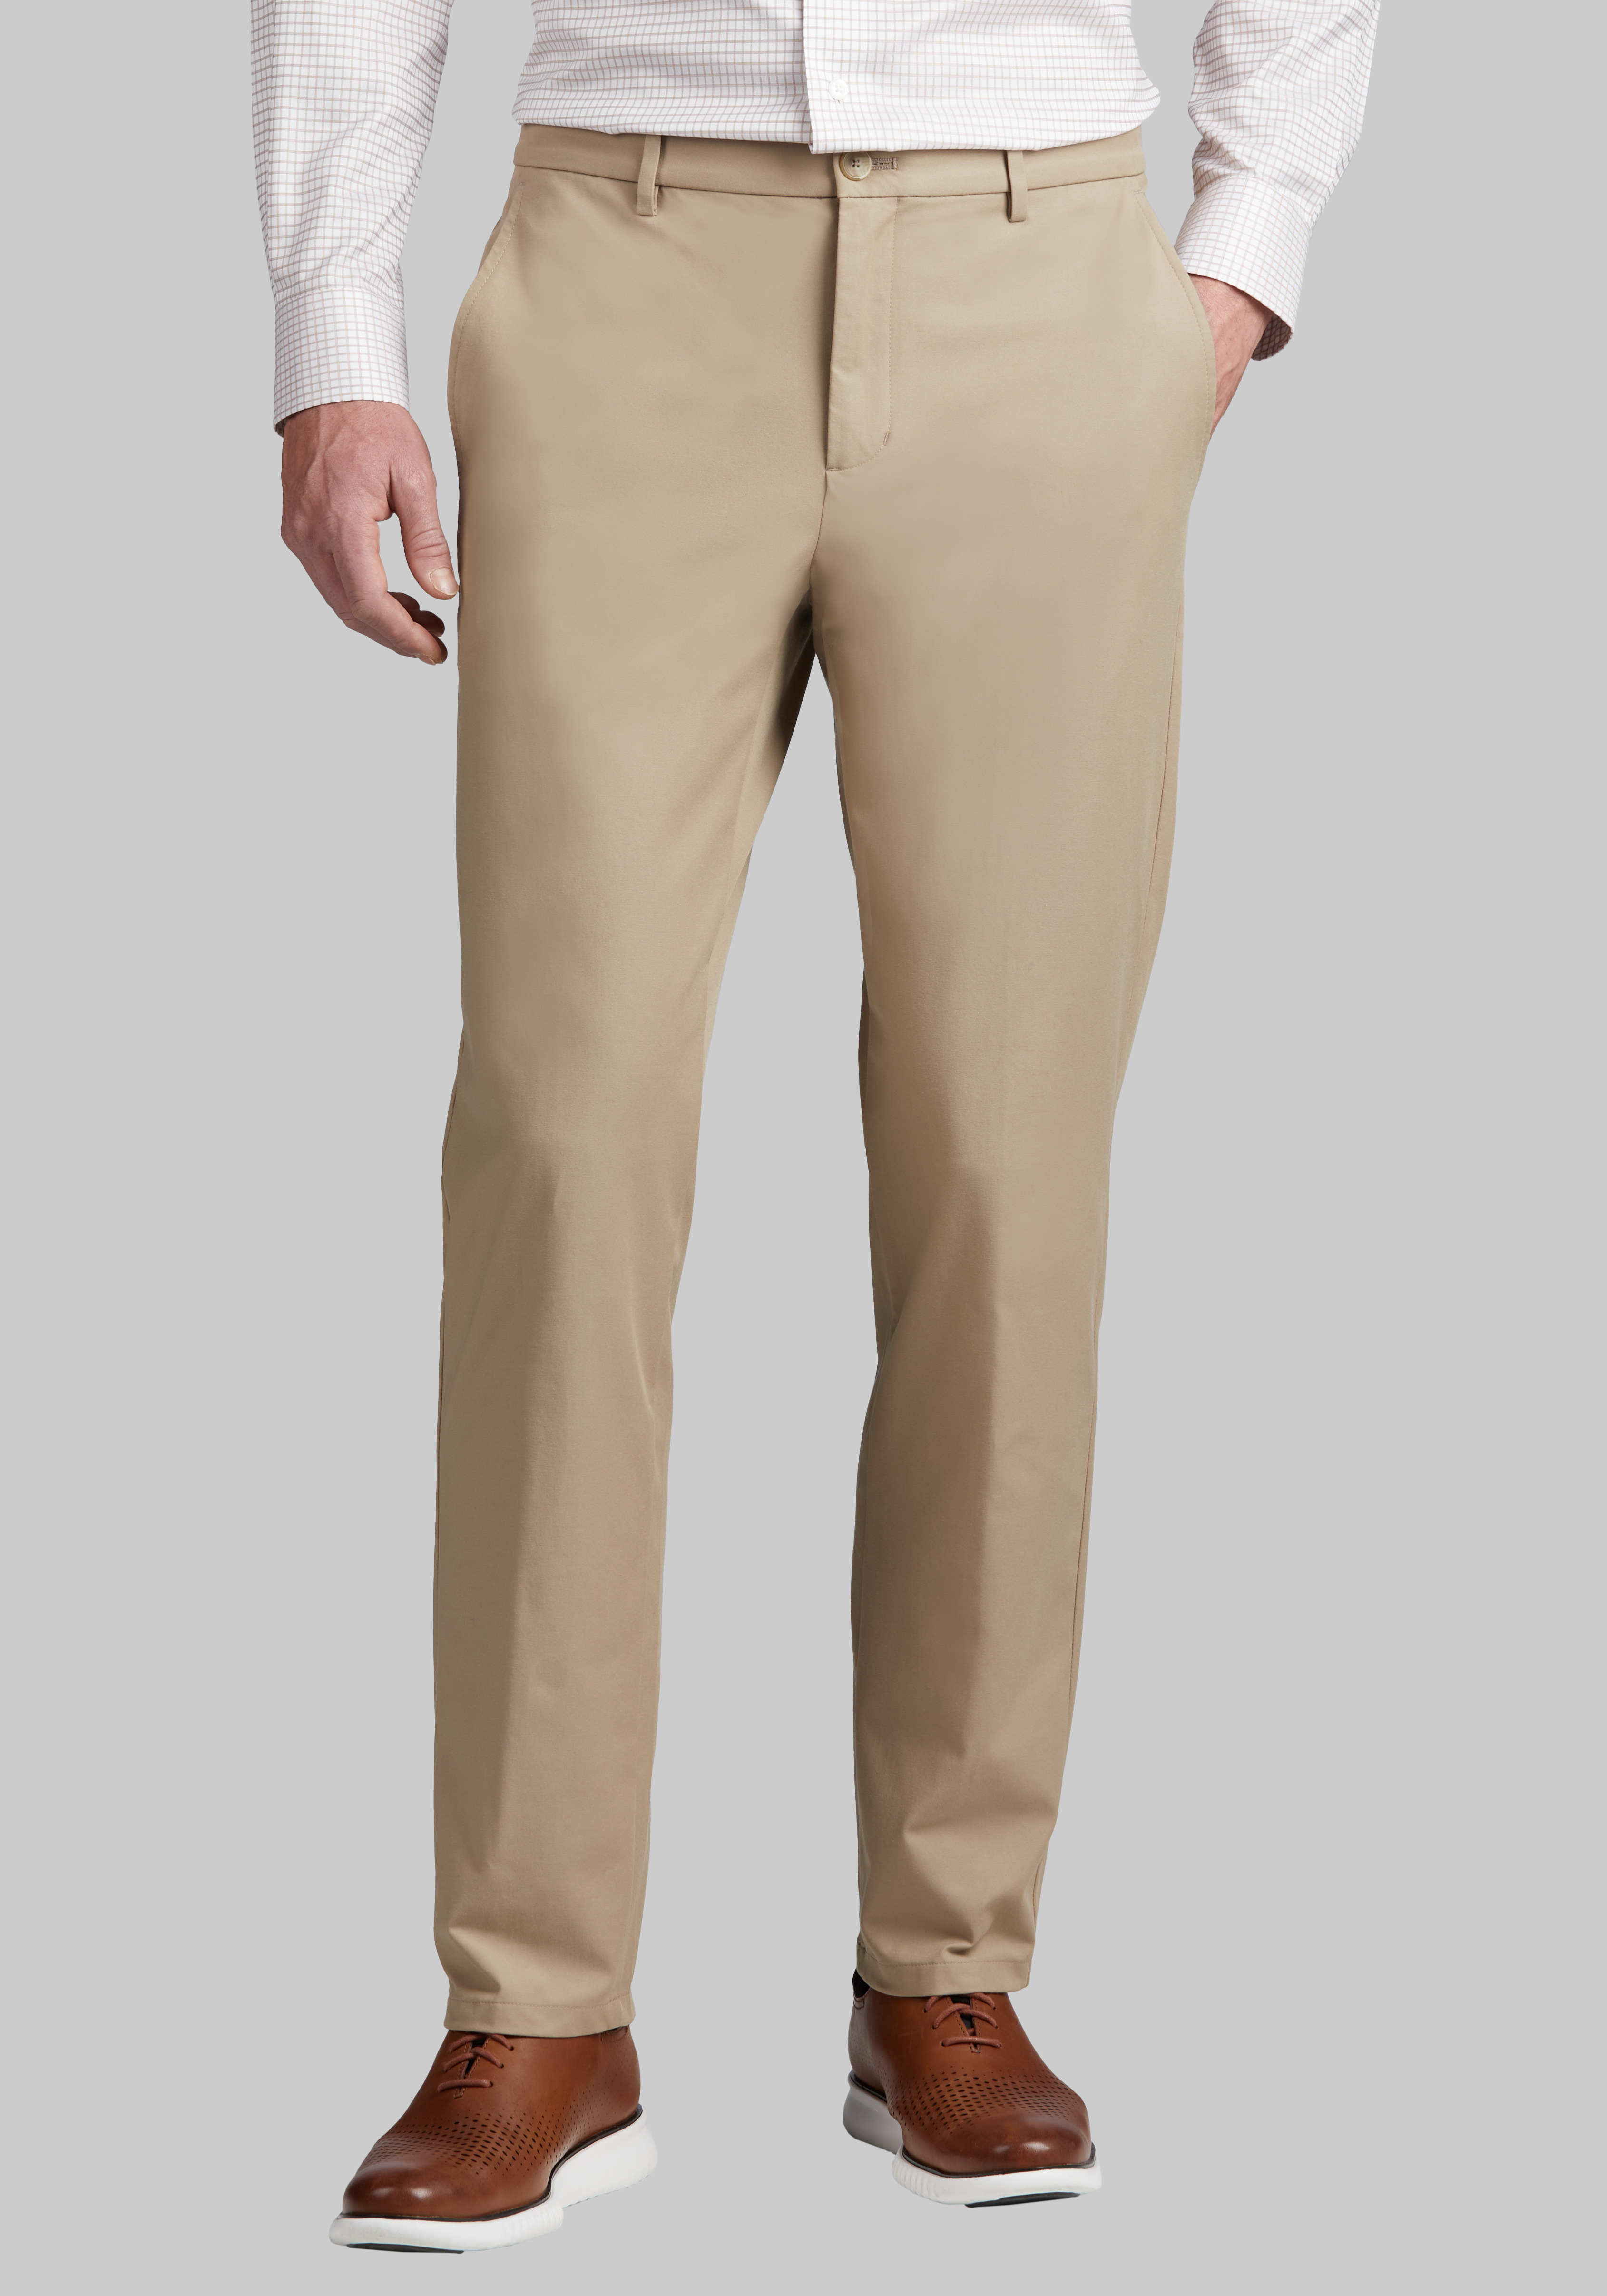 Jos. A. Bank Tailored Fit Active Five-Pocket Pants CLEARANCE